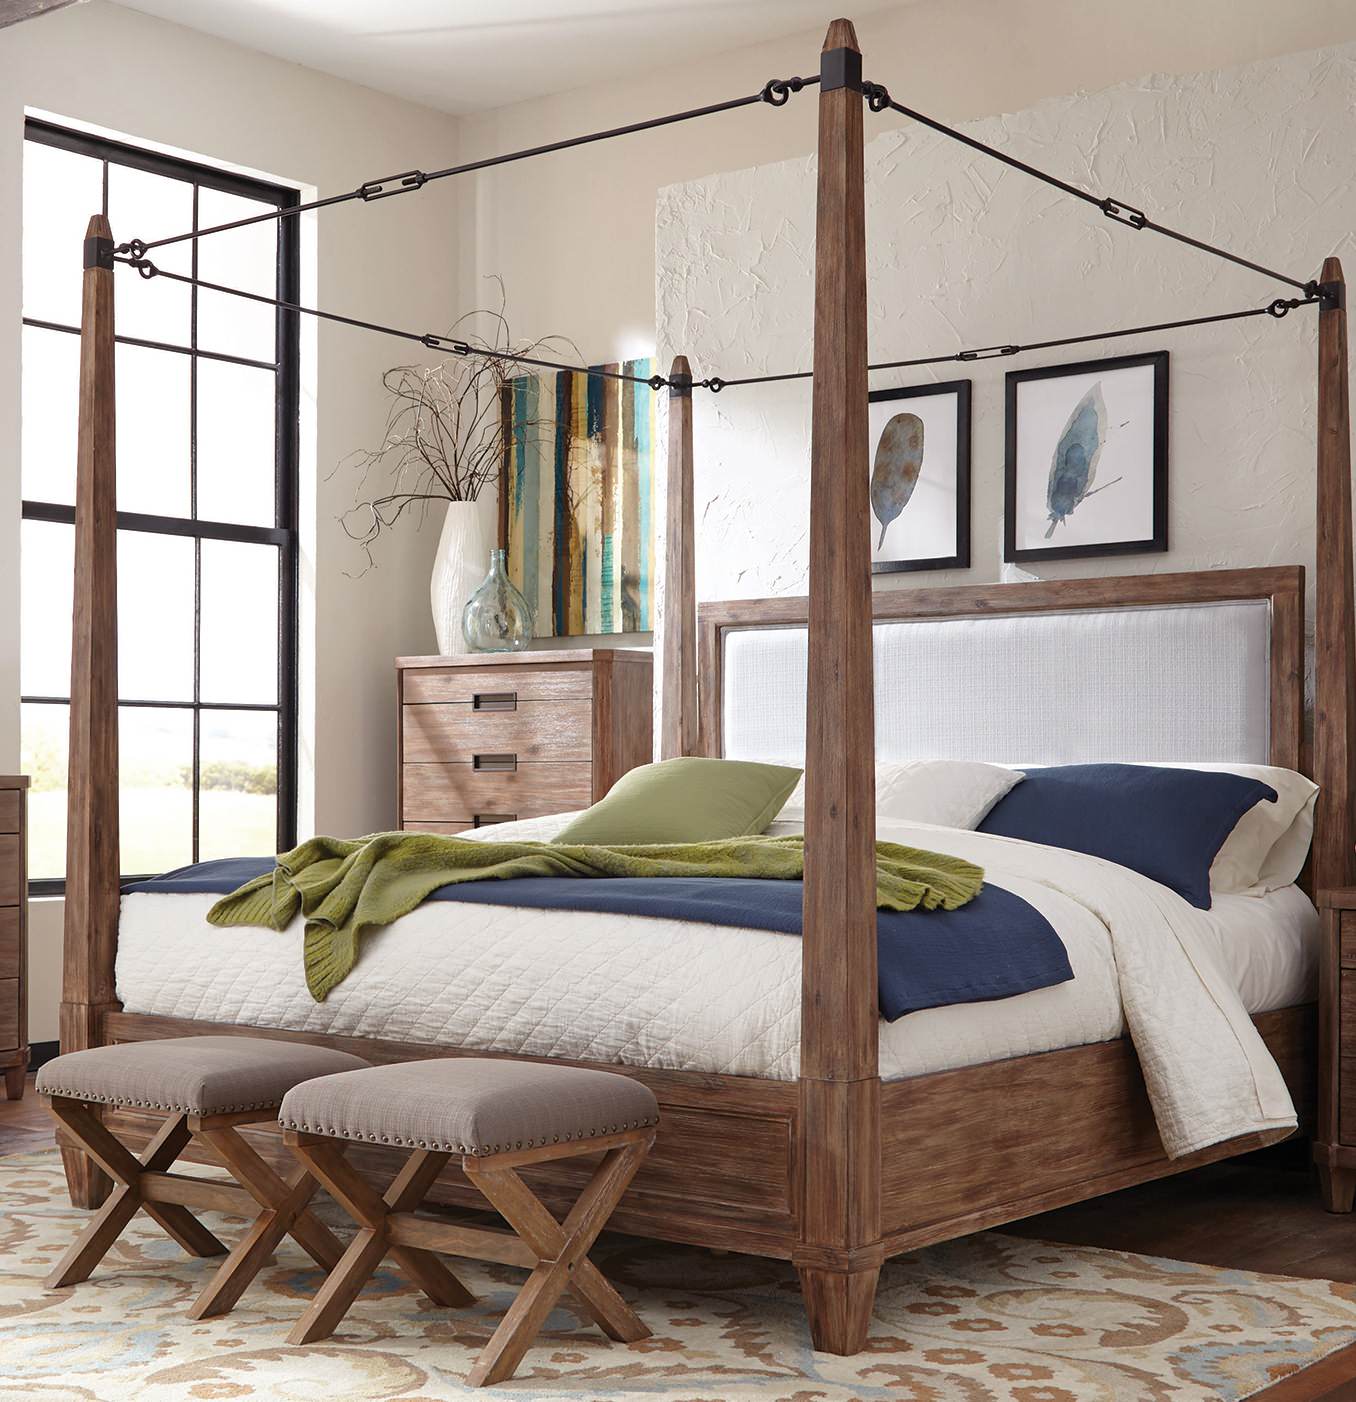 King Four Poster Bed - Photos & Ideas | Houzz